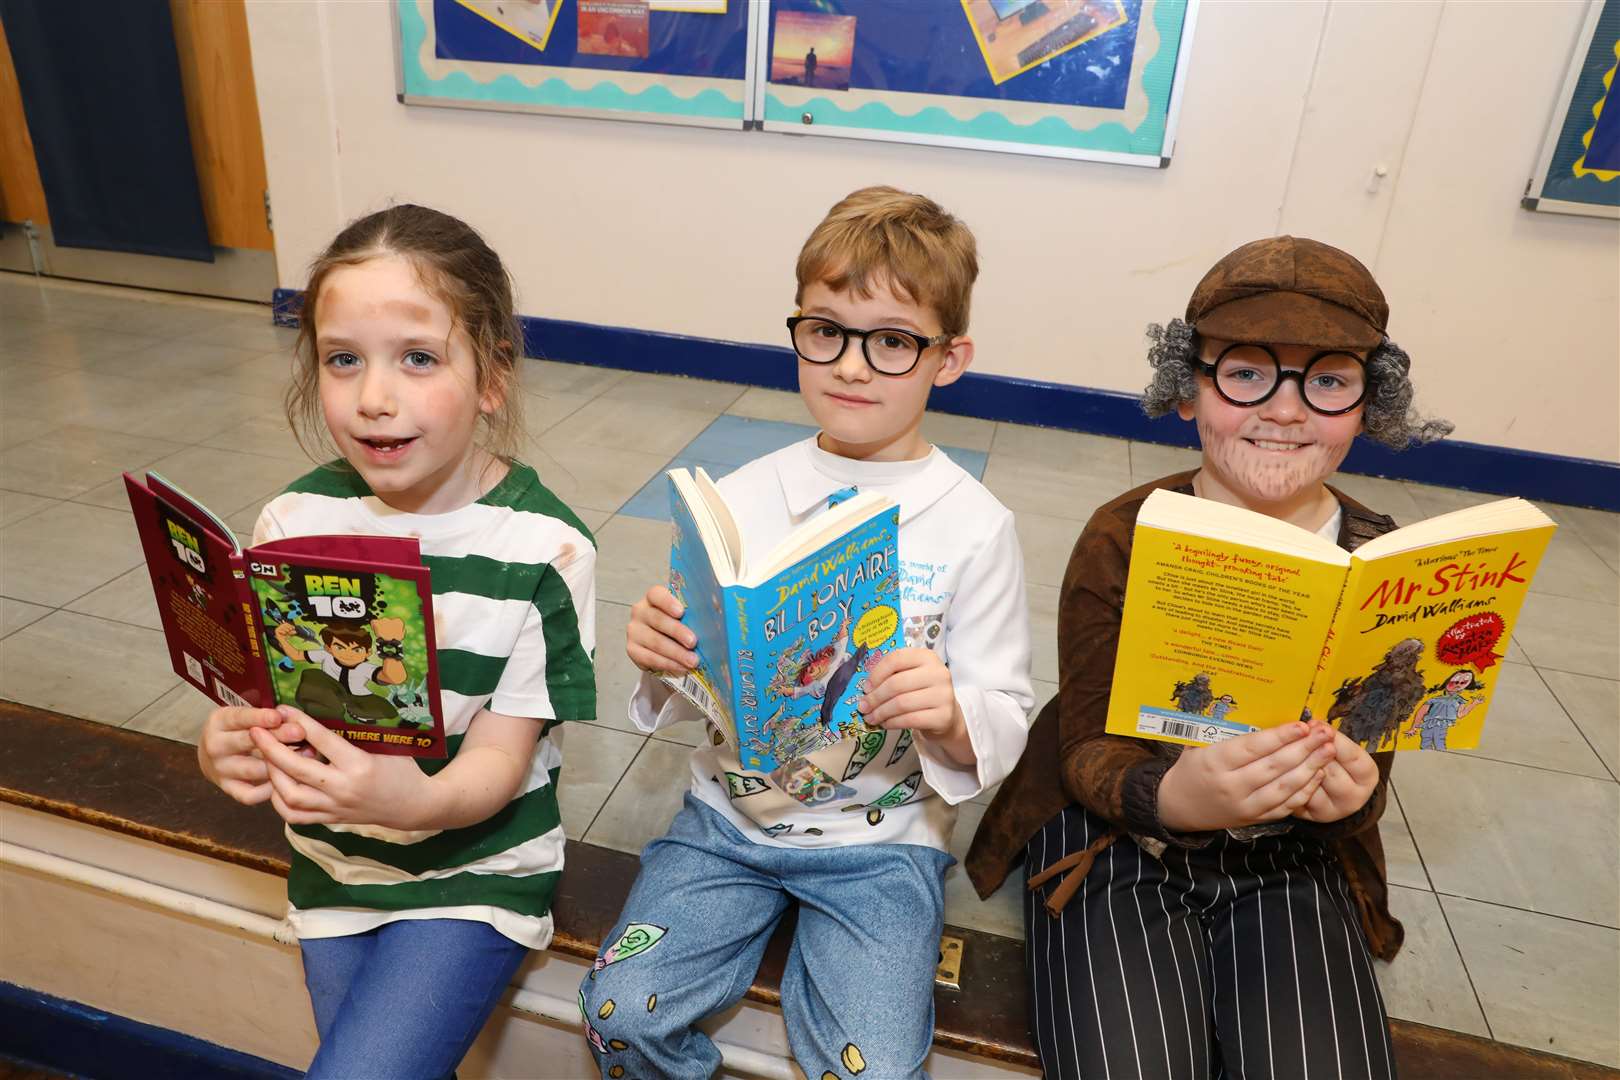 World Book Day celebrations can continue this weekend at Waterstones